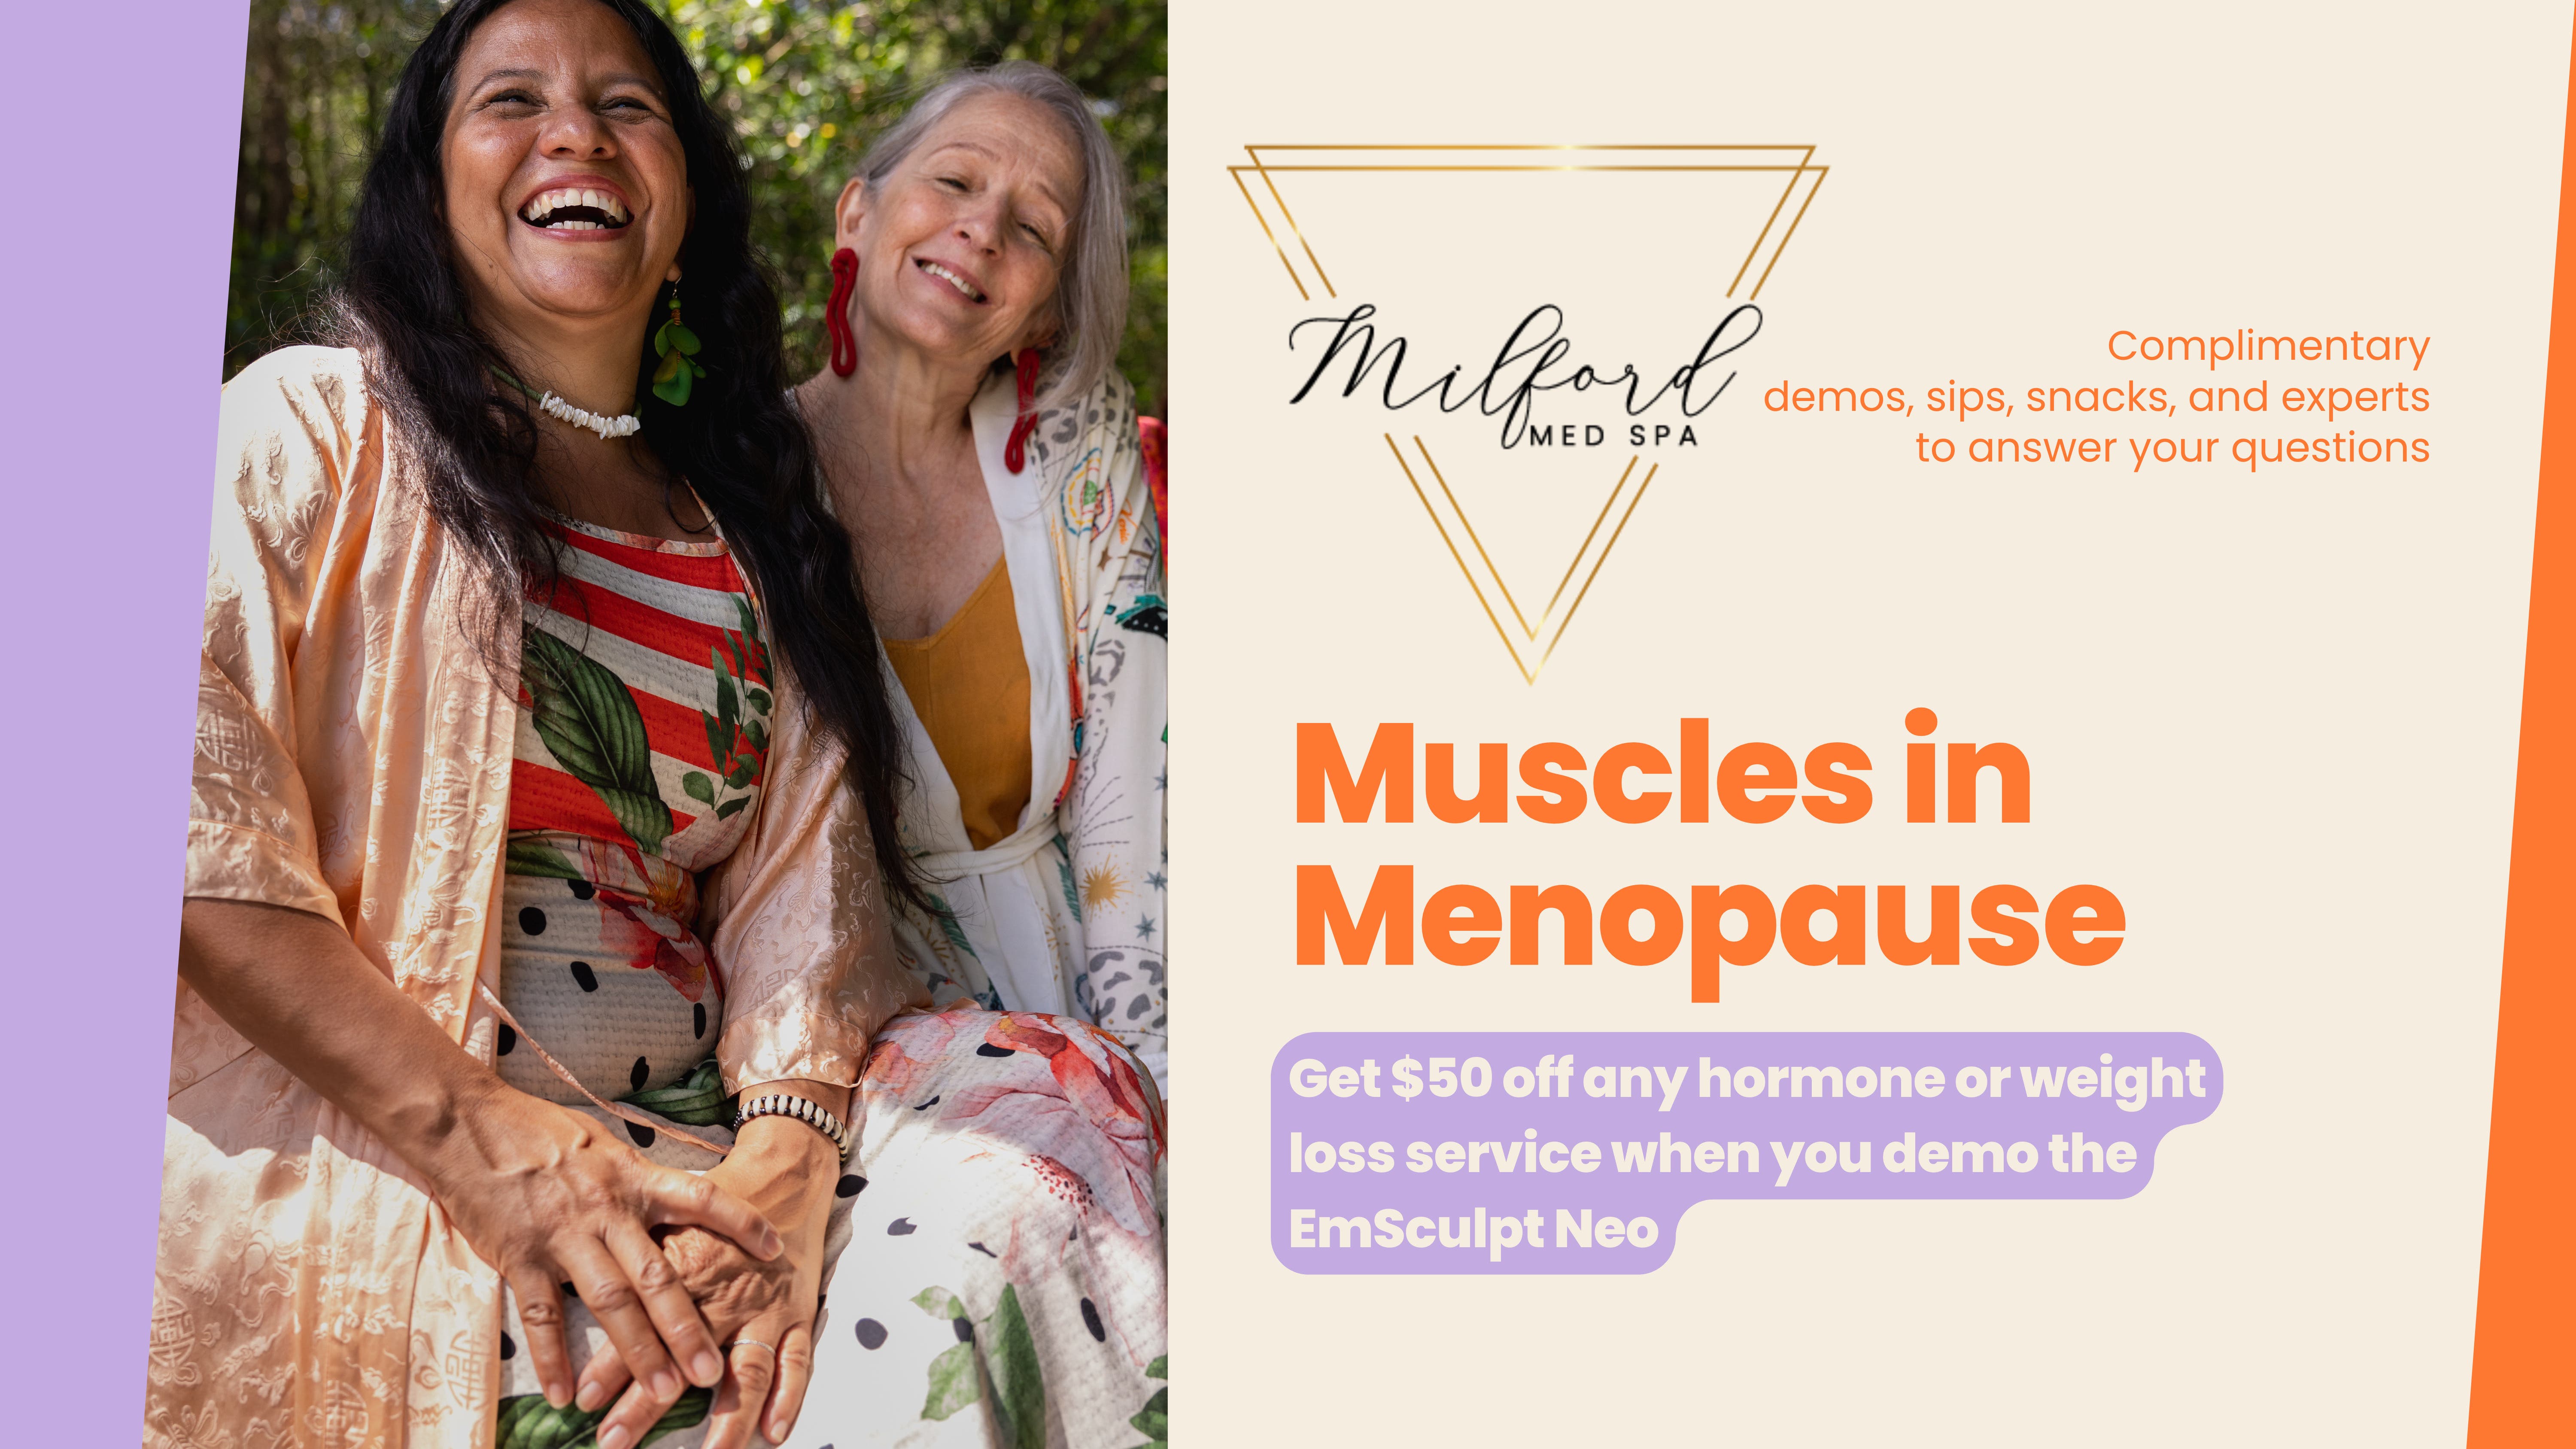 Muscles in Menopause at Milford Med Spa